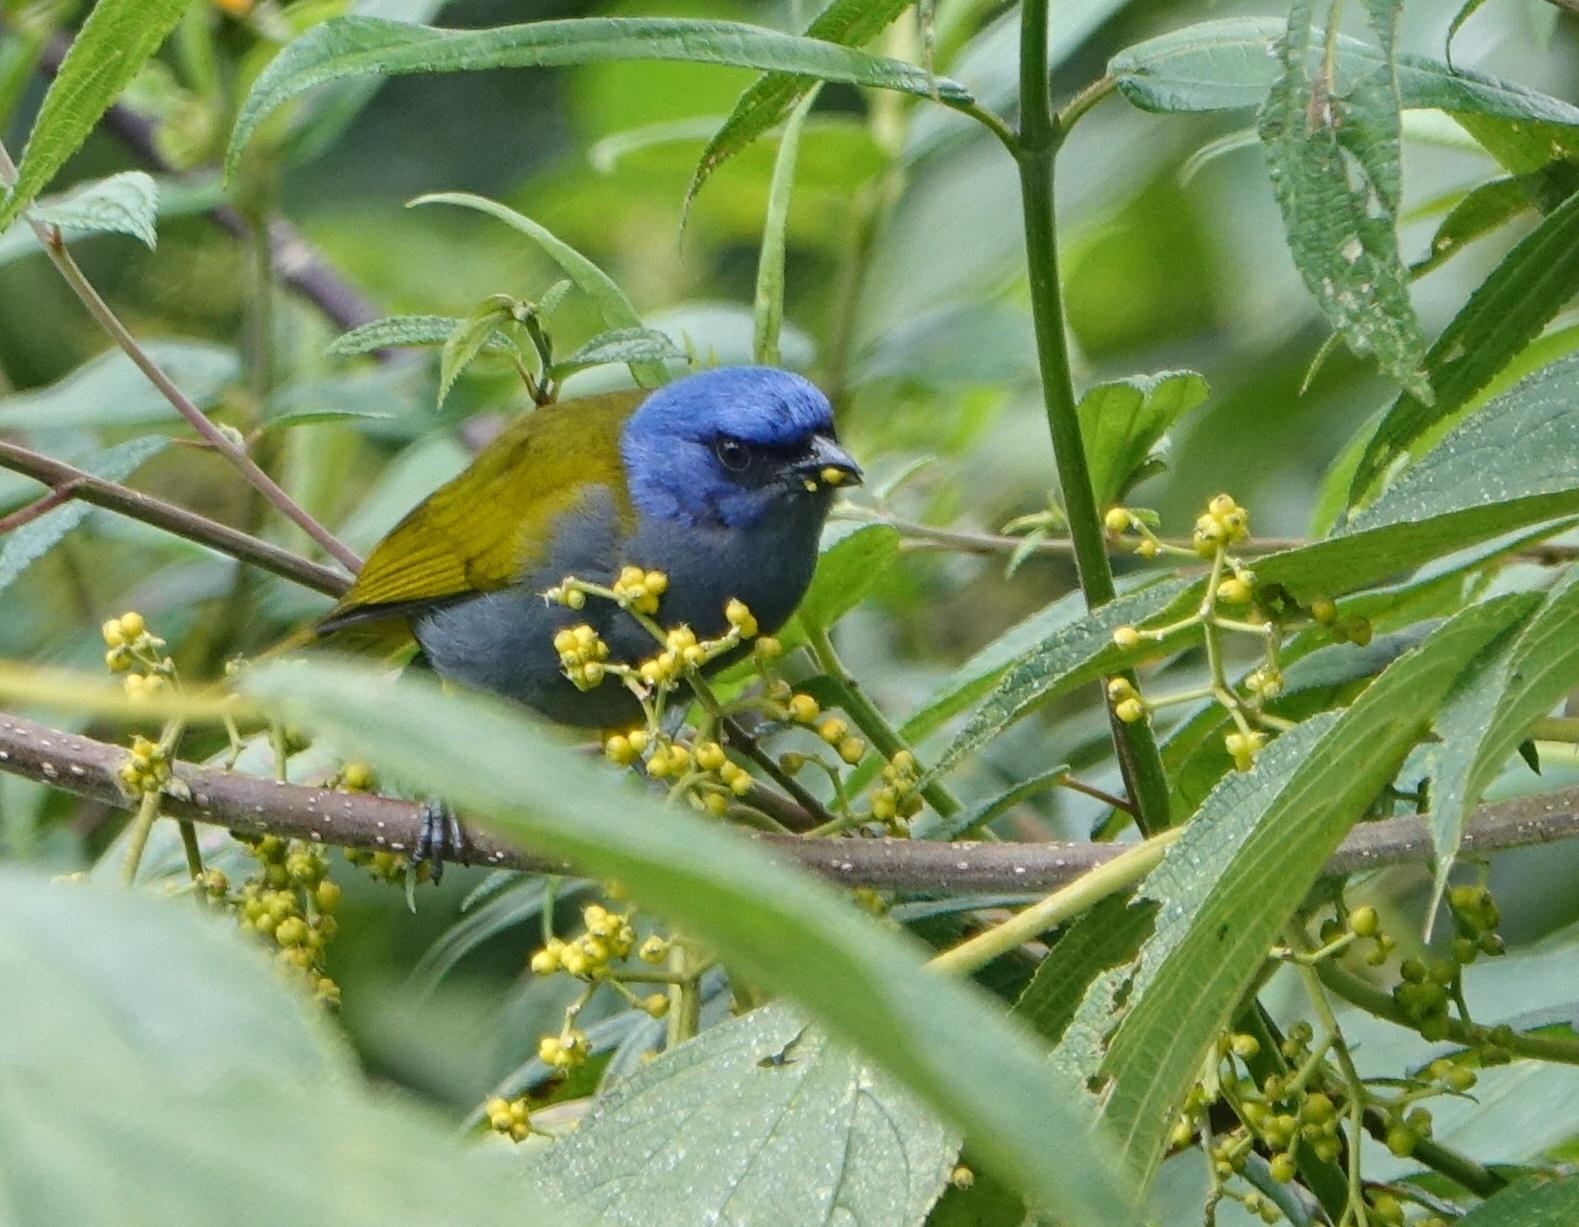 Blue-capped Tanager Photo by Doug Swartz